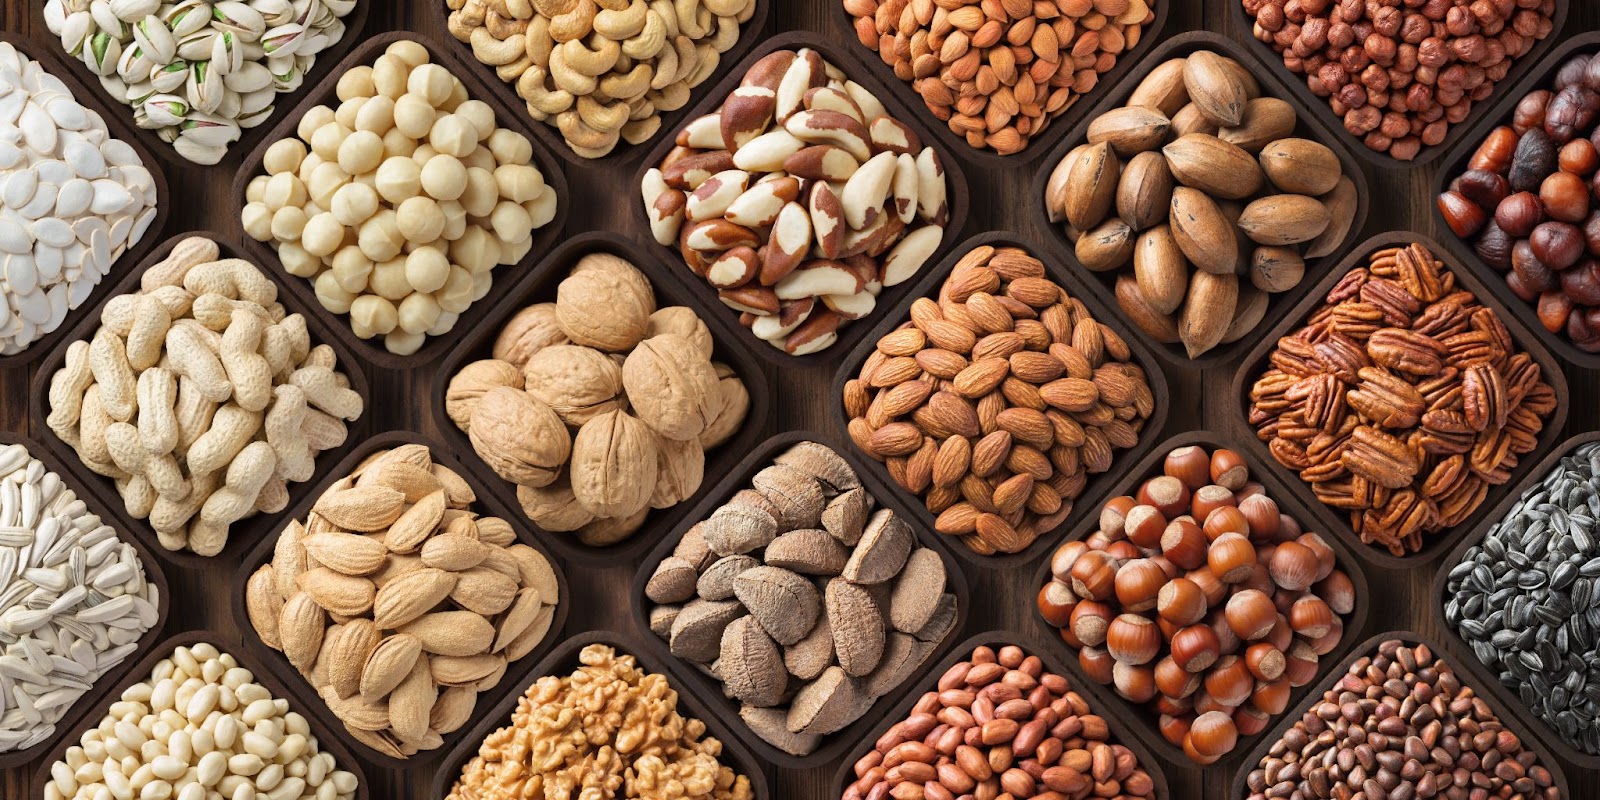 Different types of nuts, including brazil nuts, almonds, peanuts, pecans